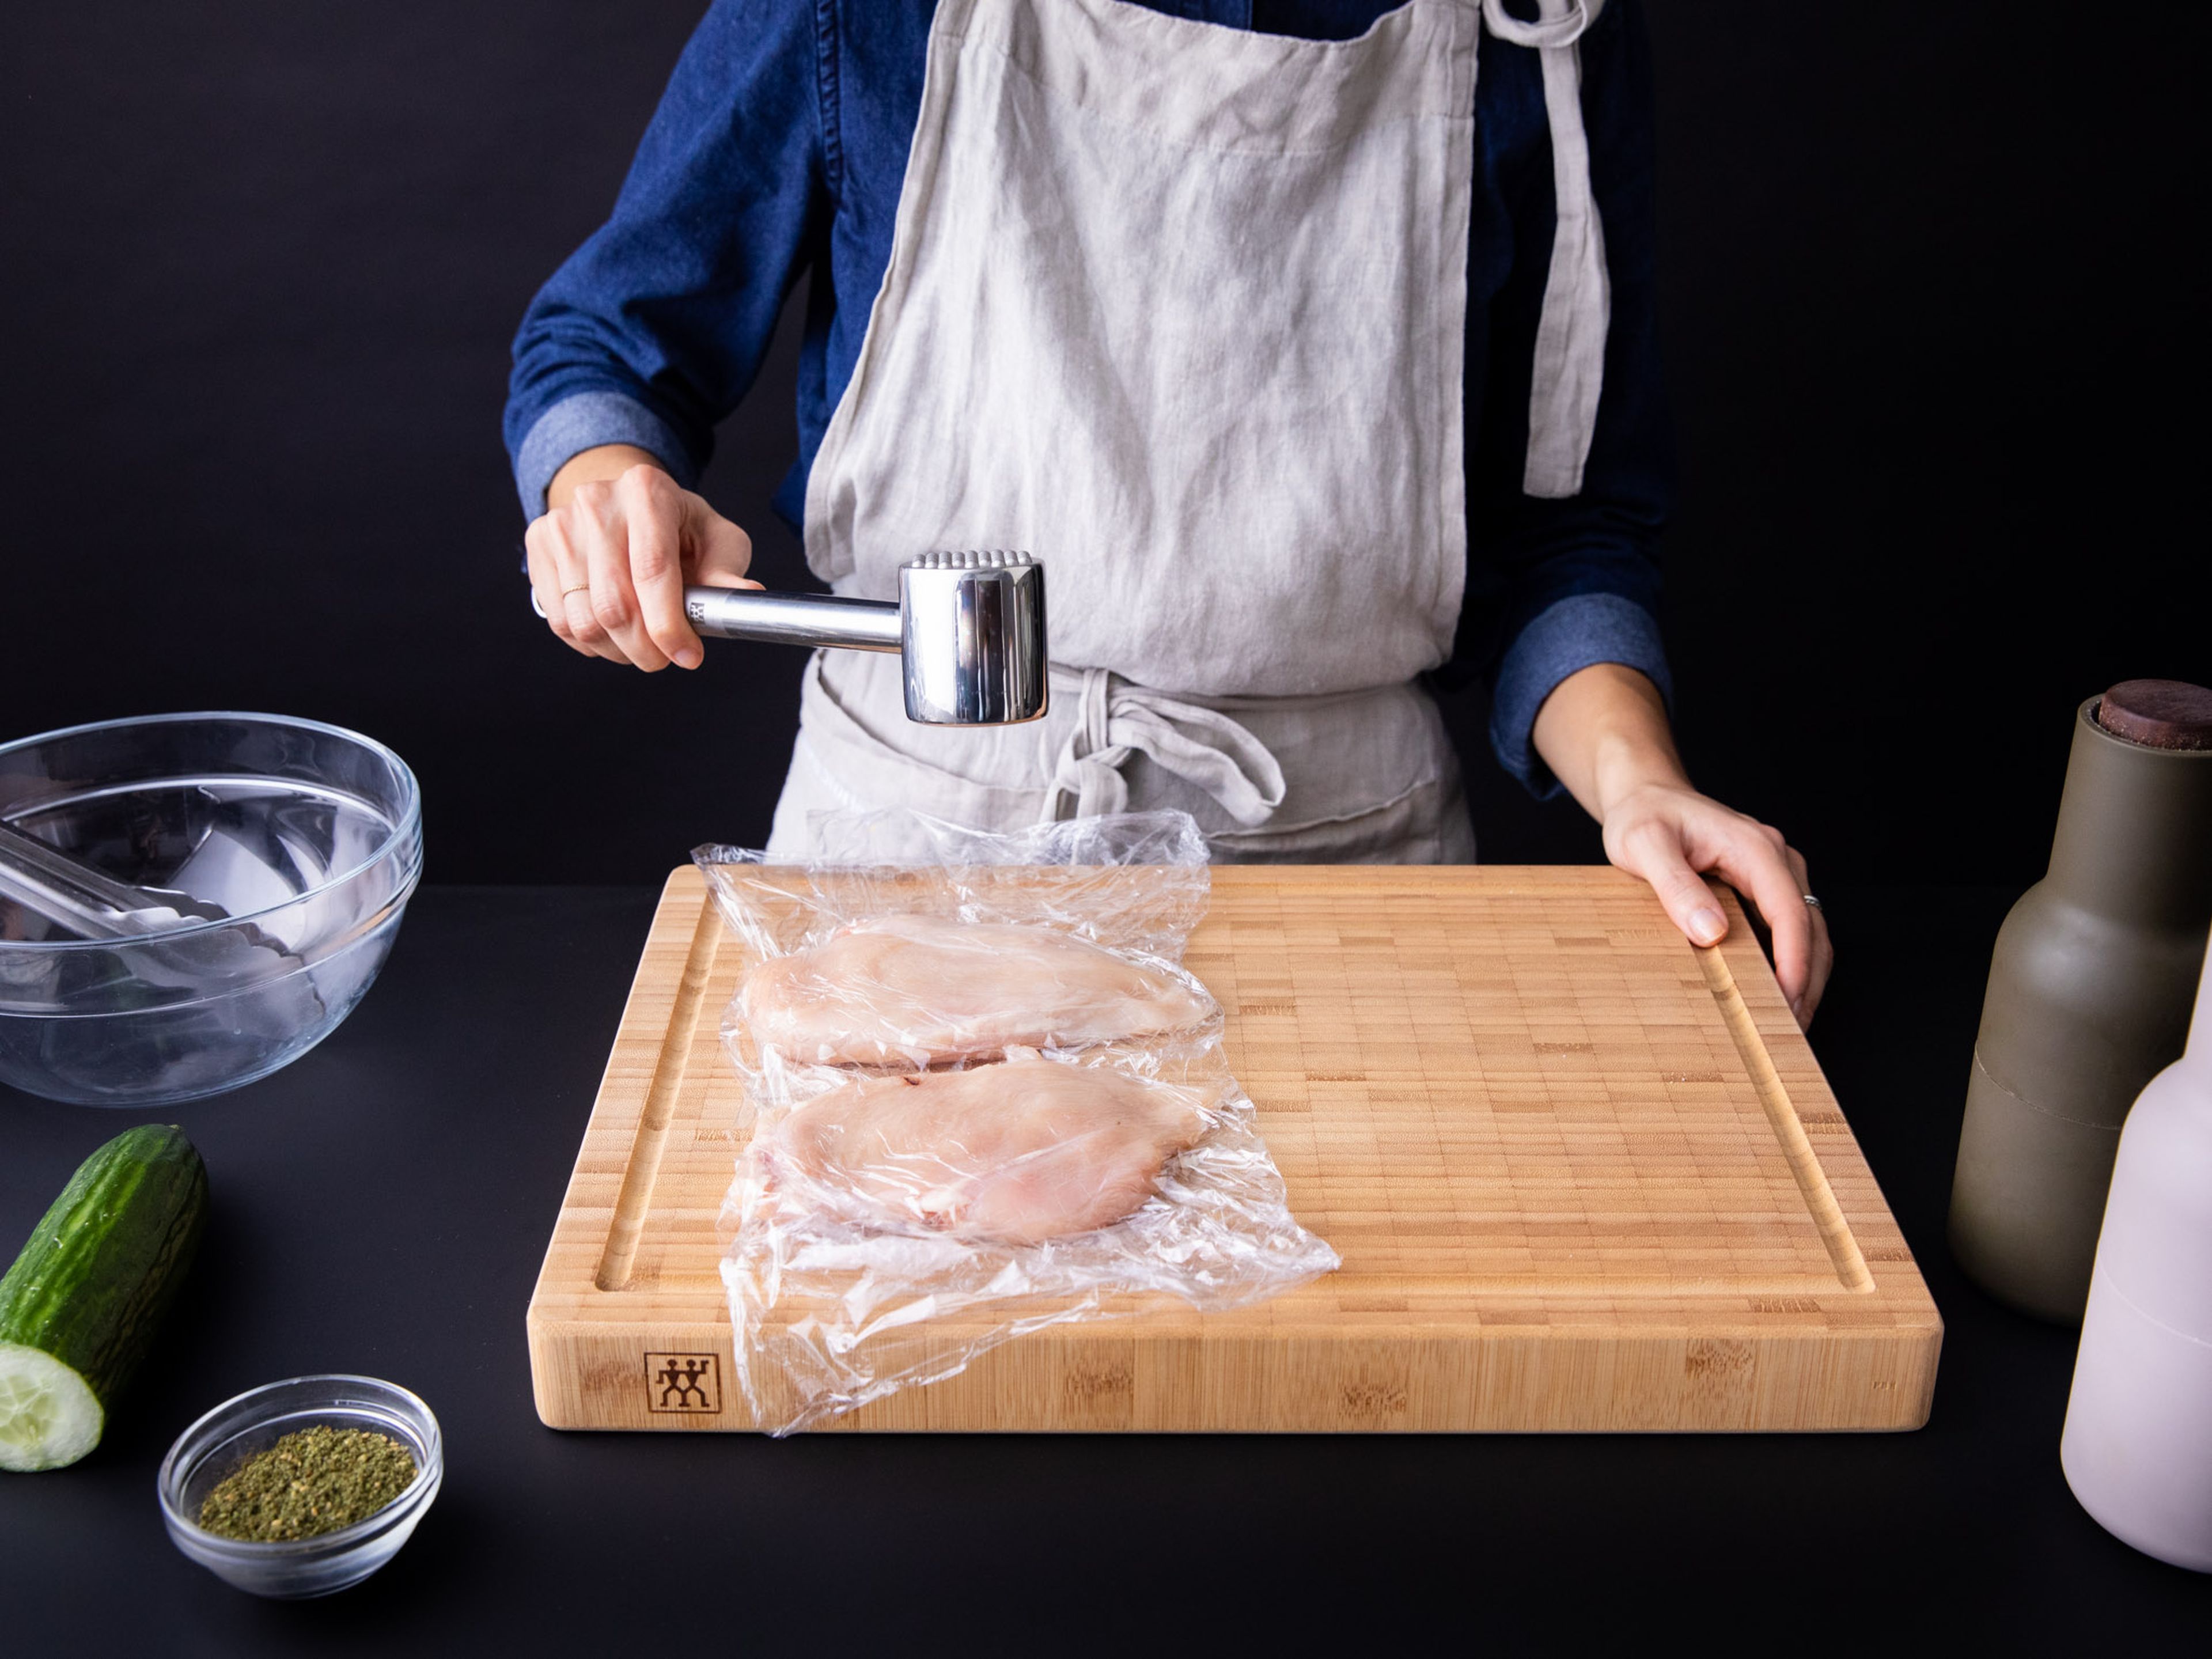 Spread a layer of plastic wrap over a cutting board and place the chicken breasts in the middle with some space between them. Add another layer of plastic over the chicken and pound them with the smooth side of a meat tenderizer just to make the chicken breast even in thickness. Season the chicken thoroughly with salt and pepper, some olive oil, and the Za’atar.